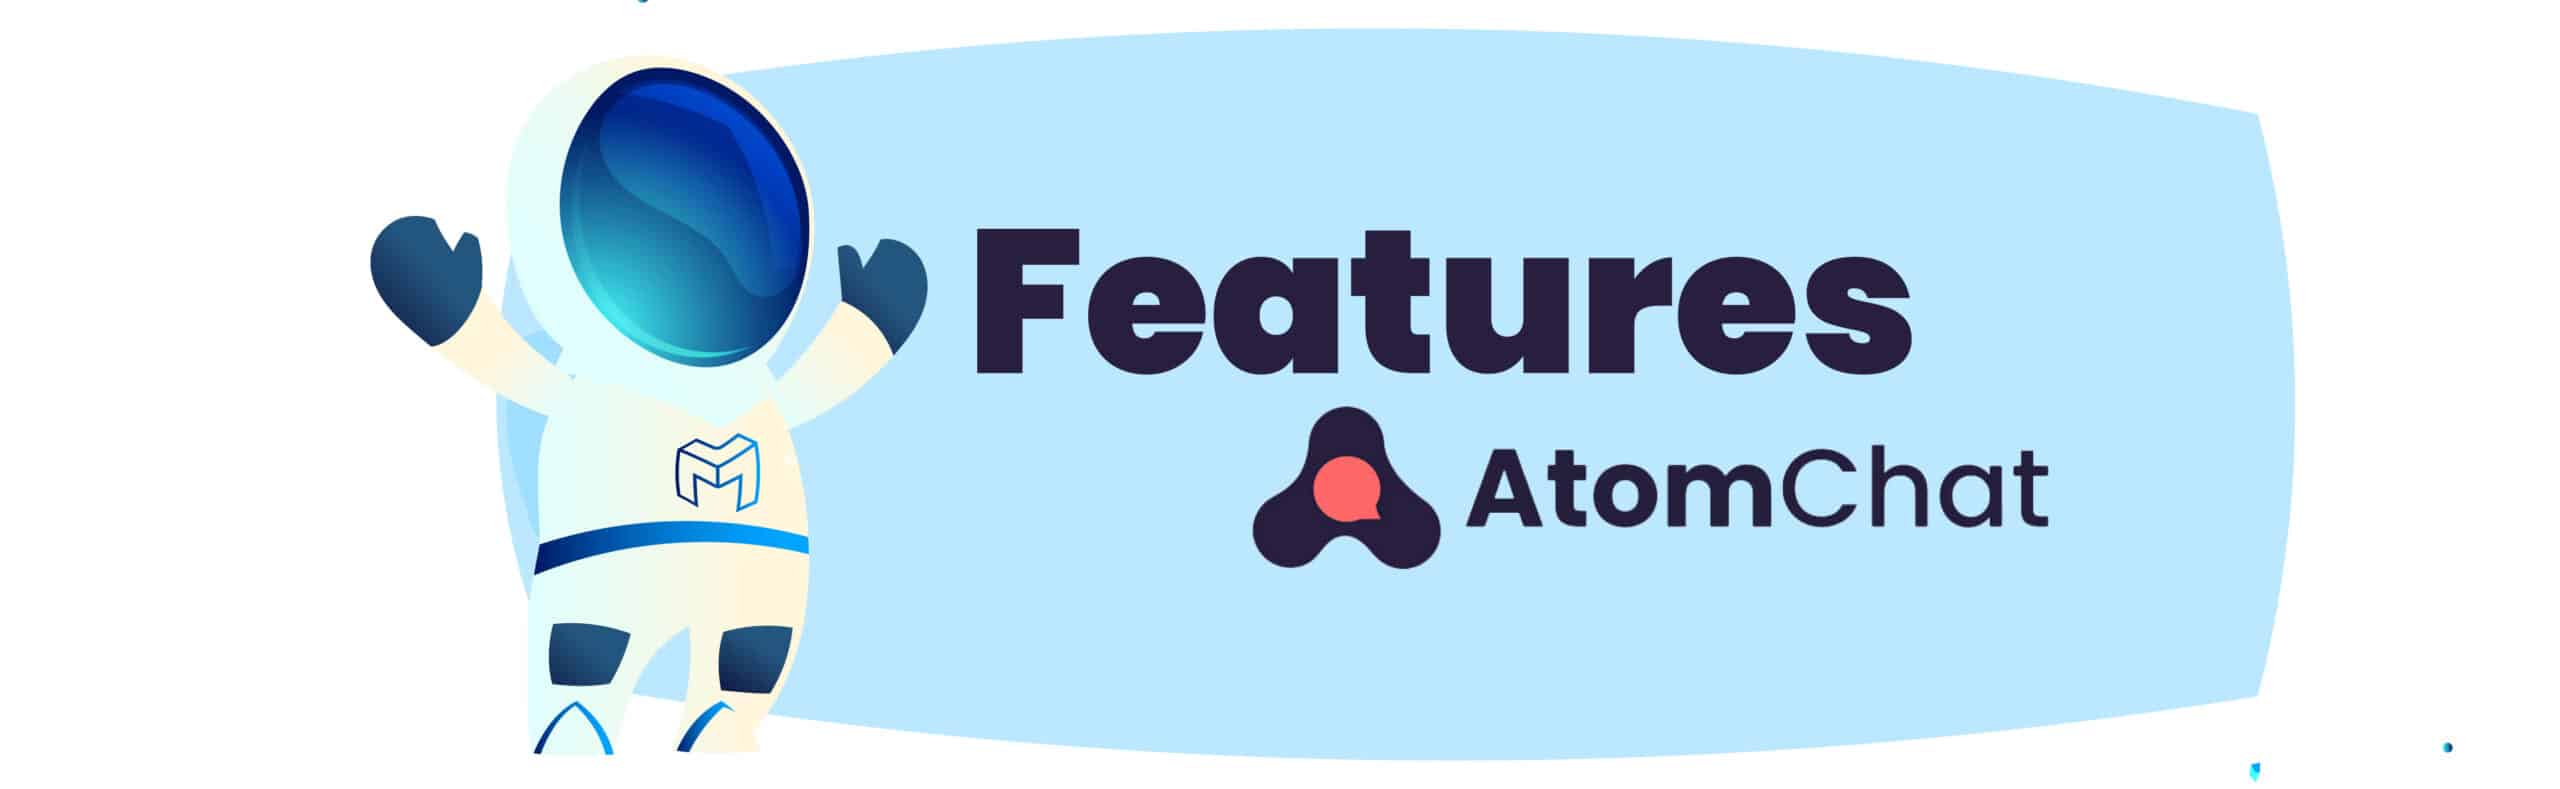 atomchat's features